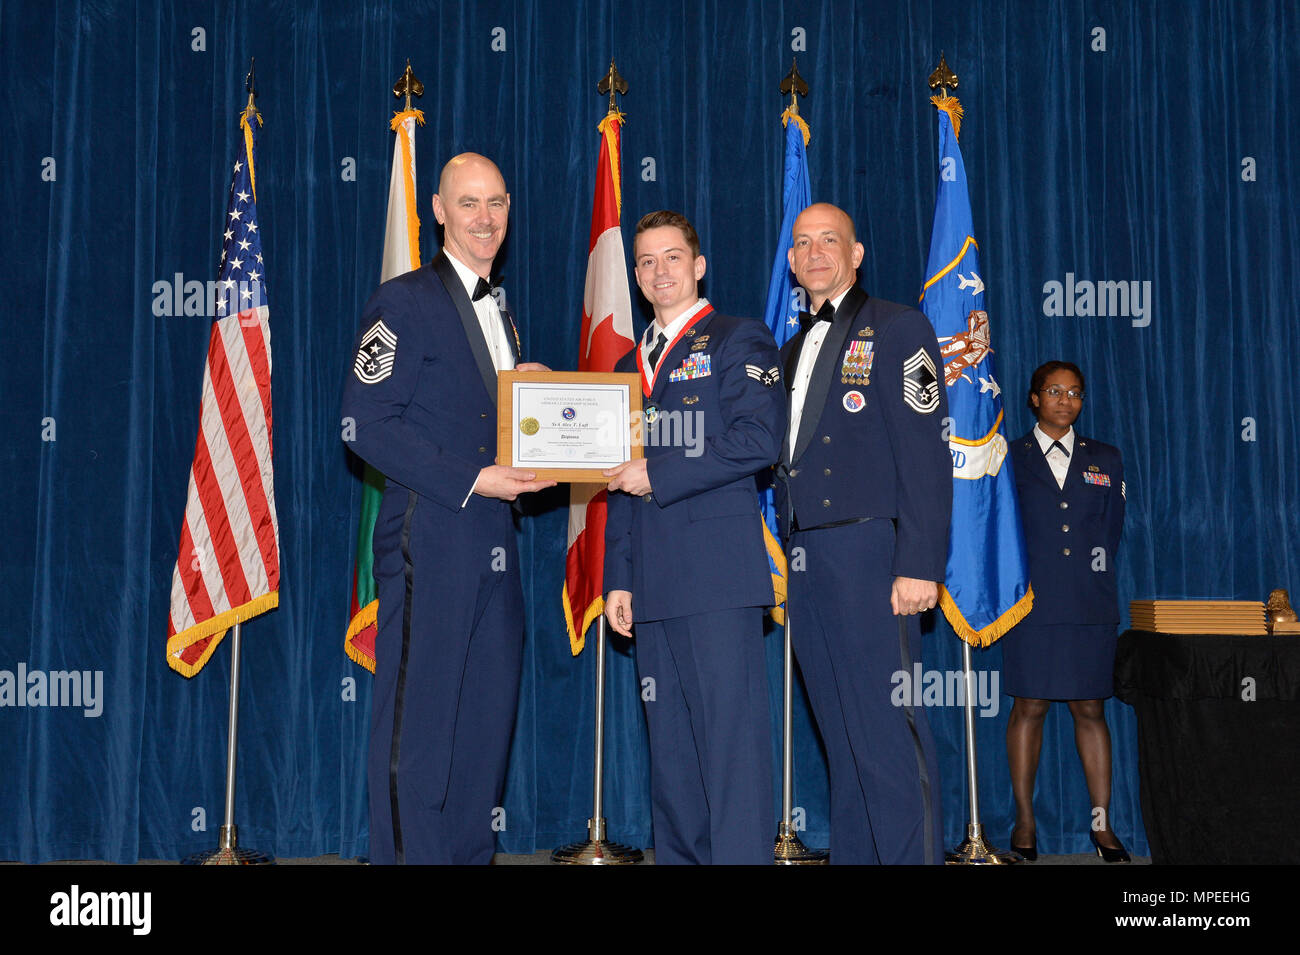 Senior Airman Alex Luft, center, receives the Distinguished Graduate Award  for Airman leadership school class 17-3 from Chief Master Sgt. Ronald  Anderson, Chief Master Sgt. of the Air National Guard, and Chief